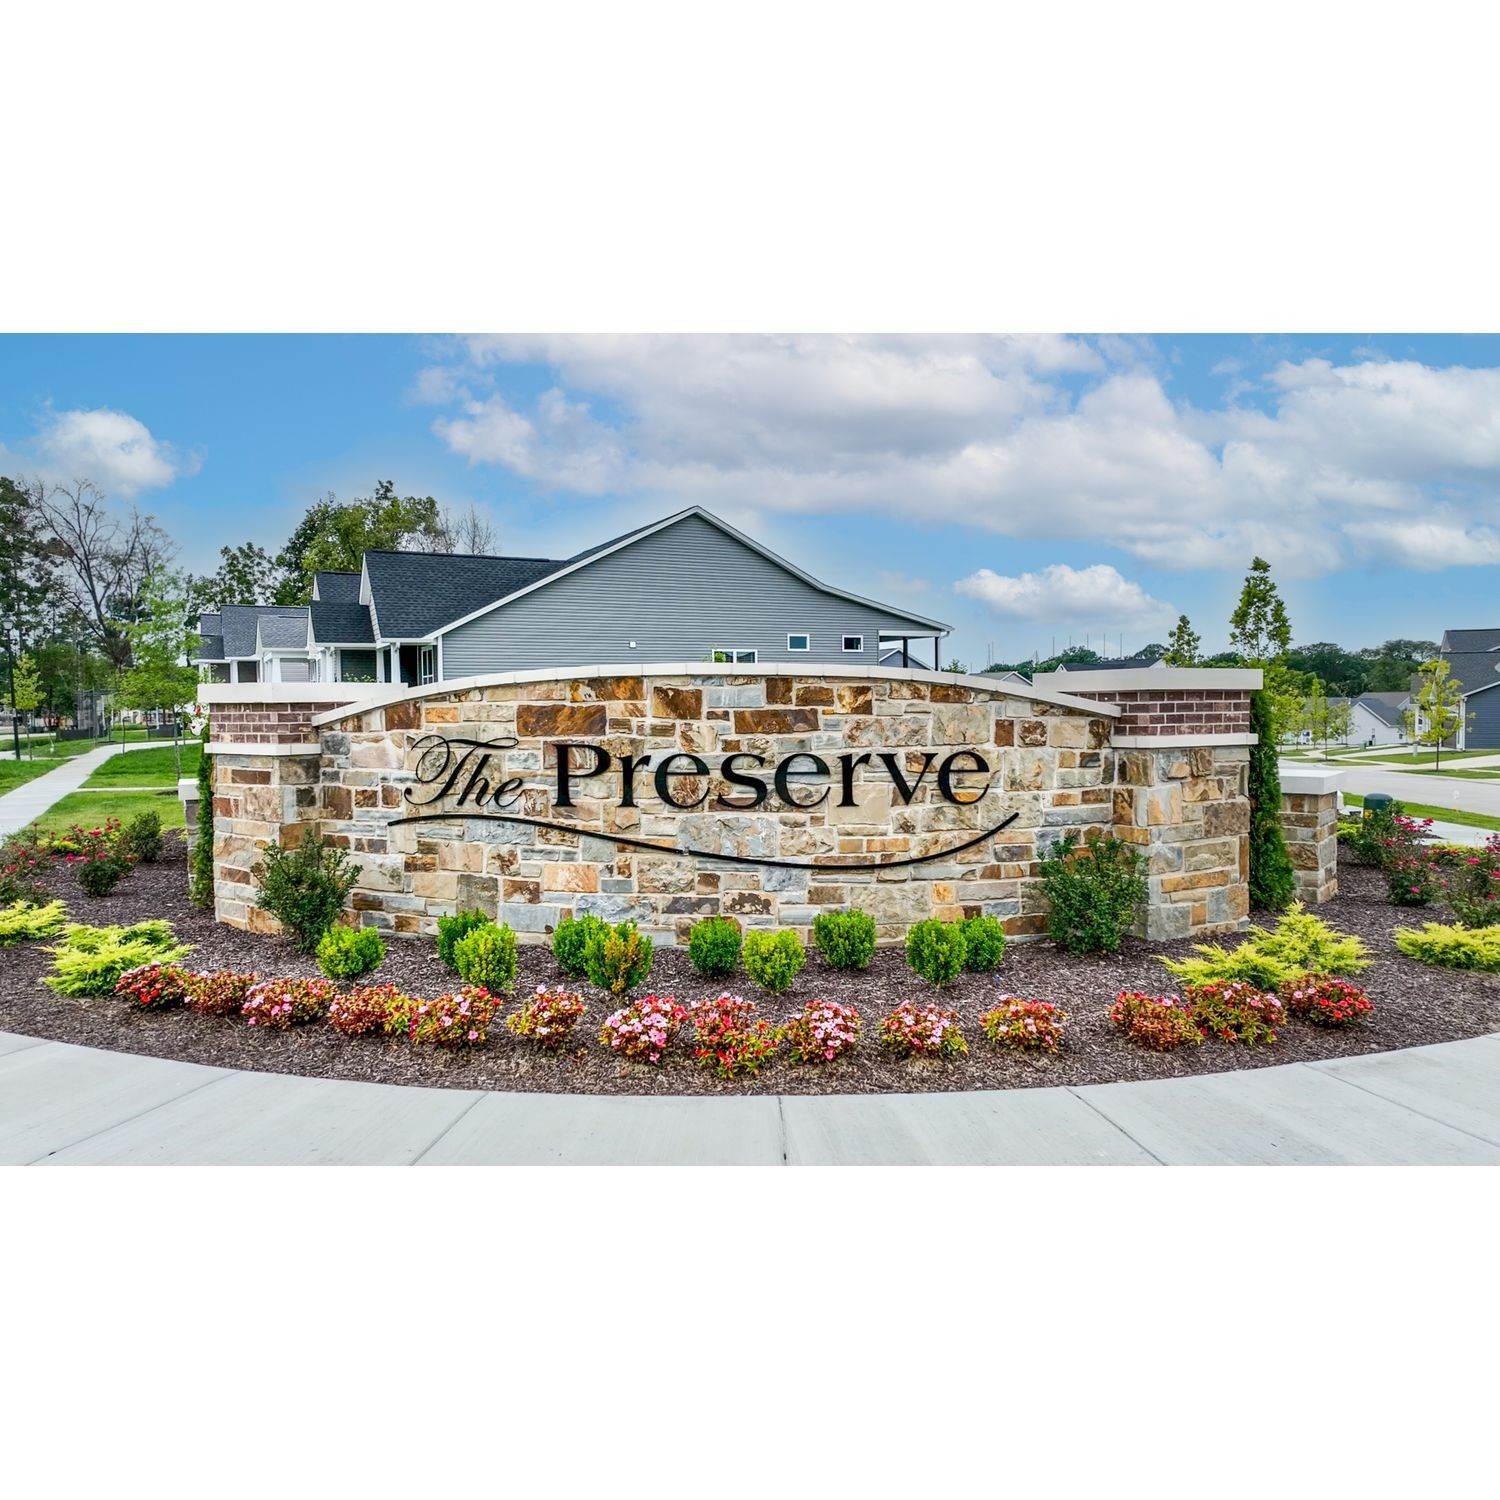 4. The Preserve xây dựng tại 6704 Preservation Parkway, St. Louis, MO 63123